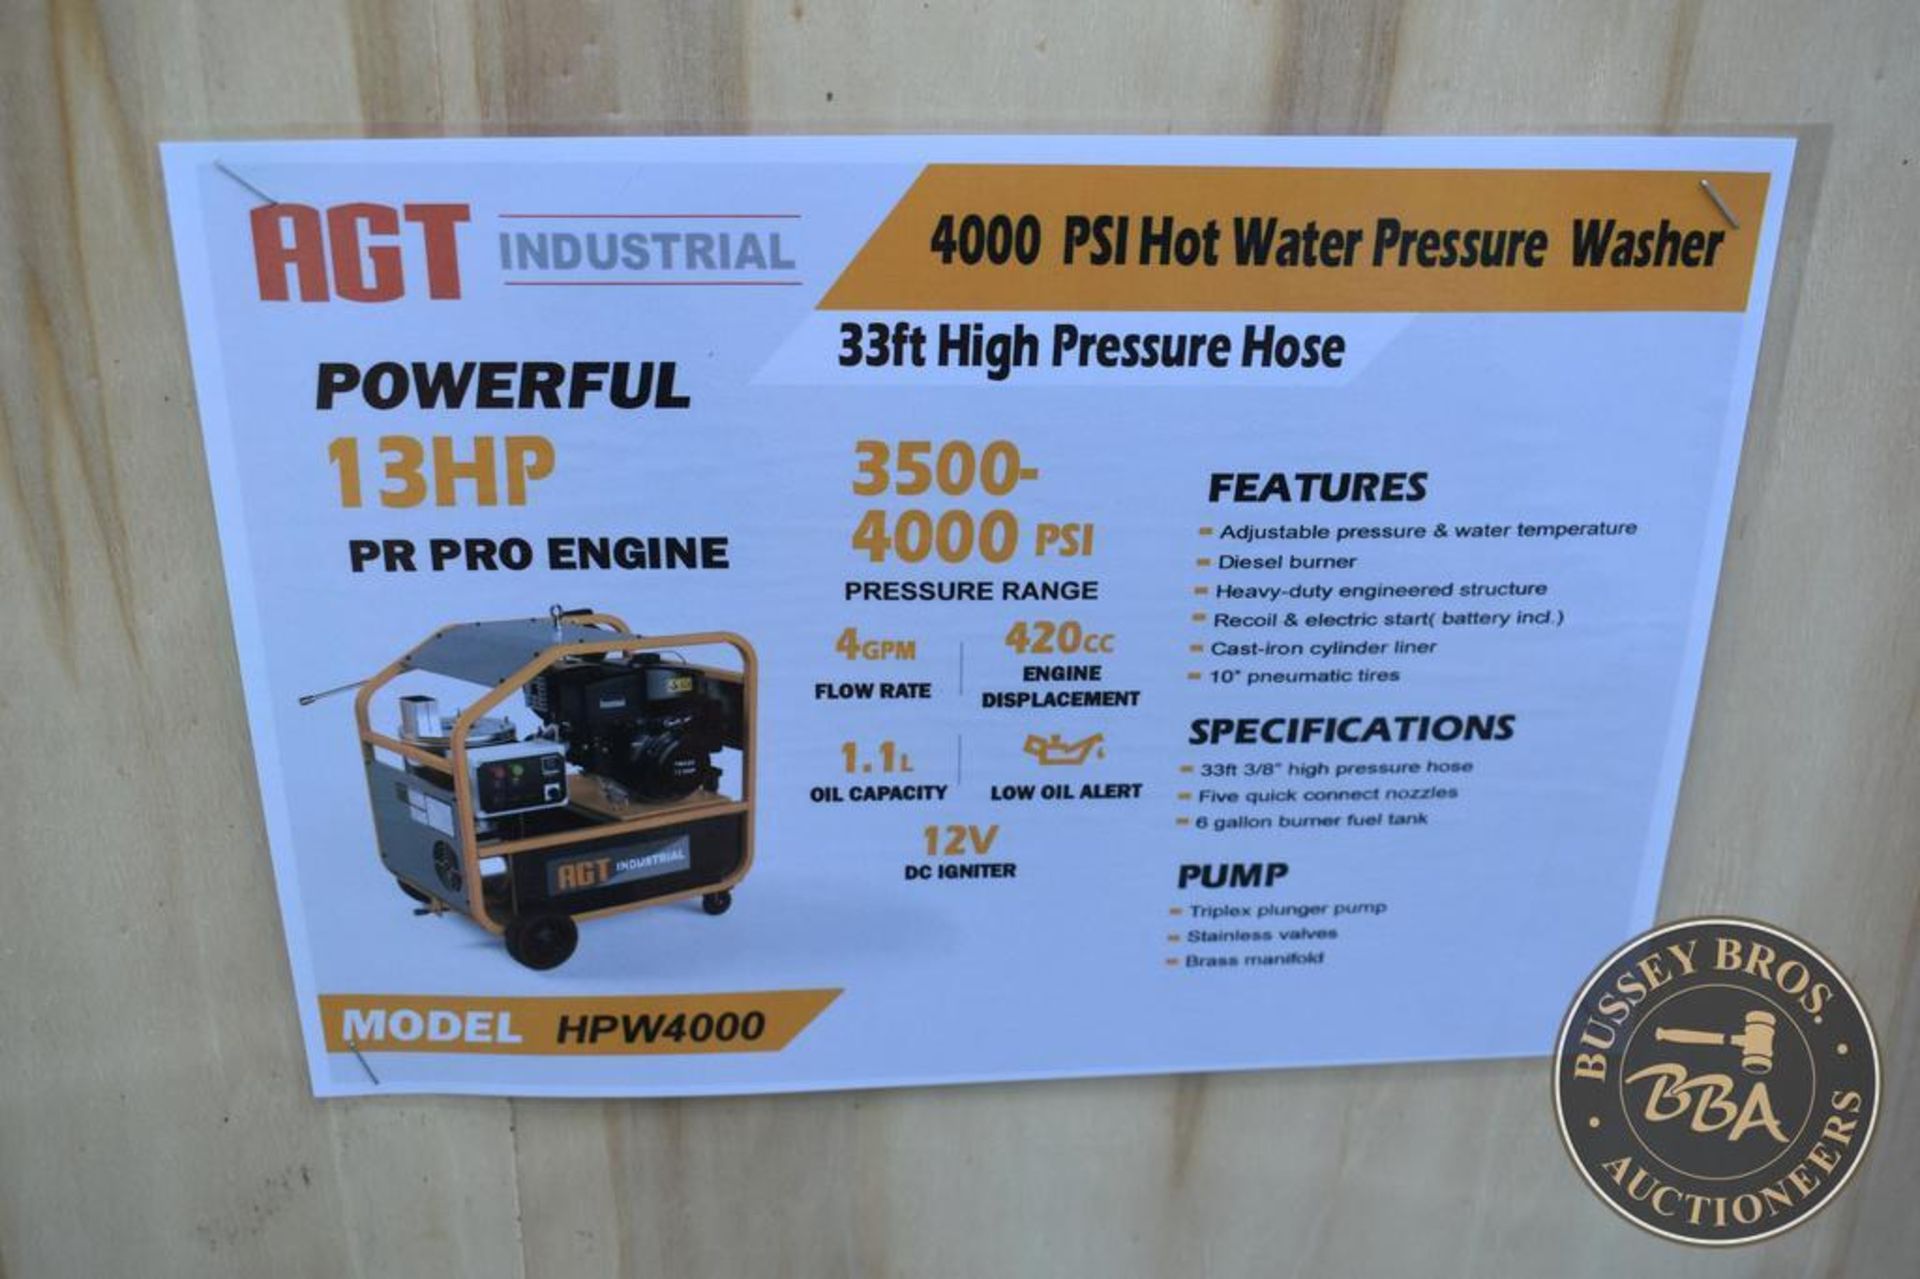 AGT INDUSTRIAL 4000PSI HOT WATER PRESSURE WASHER 27486 - Image 2 of 7